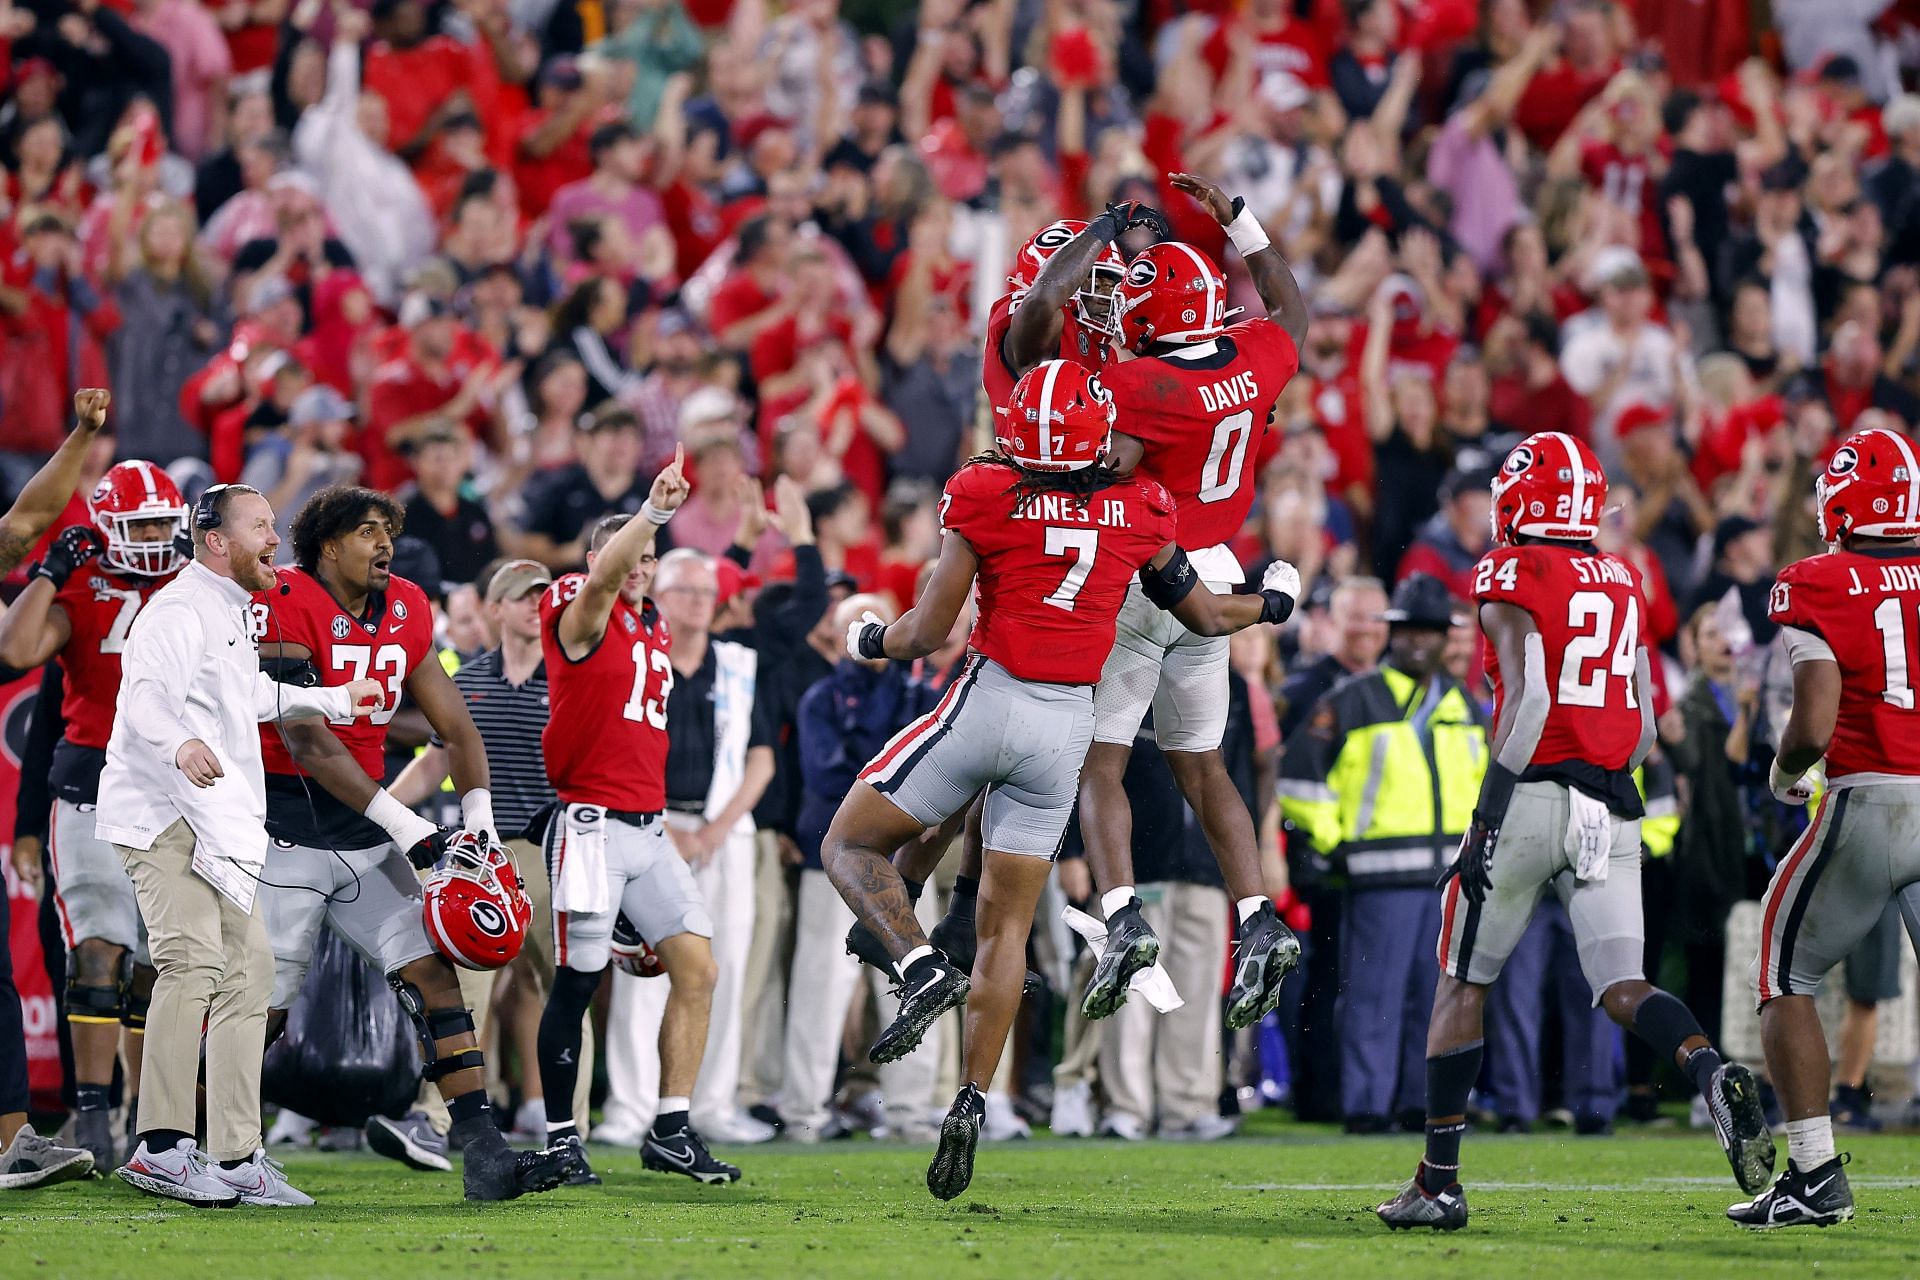 How many Georgia Bulldogs football players will suit up at Super Bowl 2023?